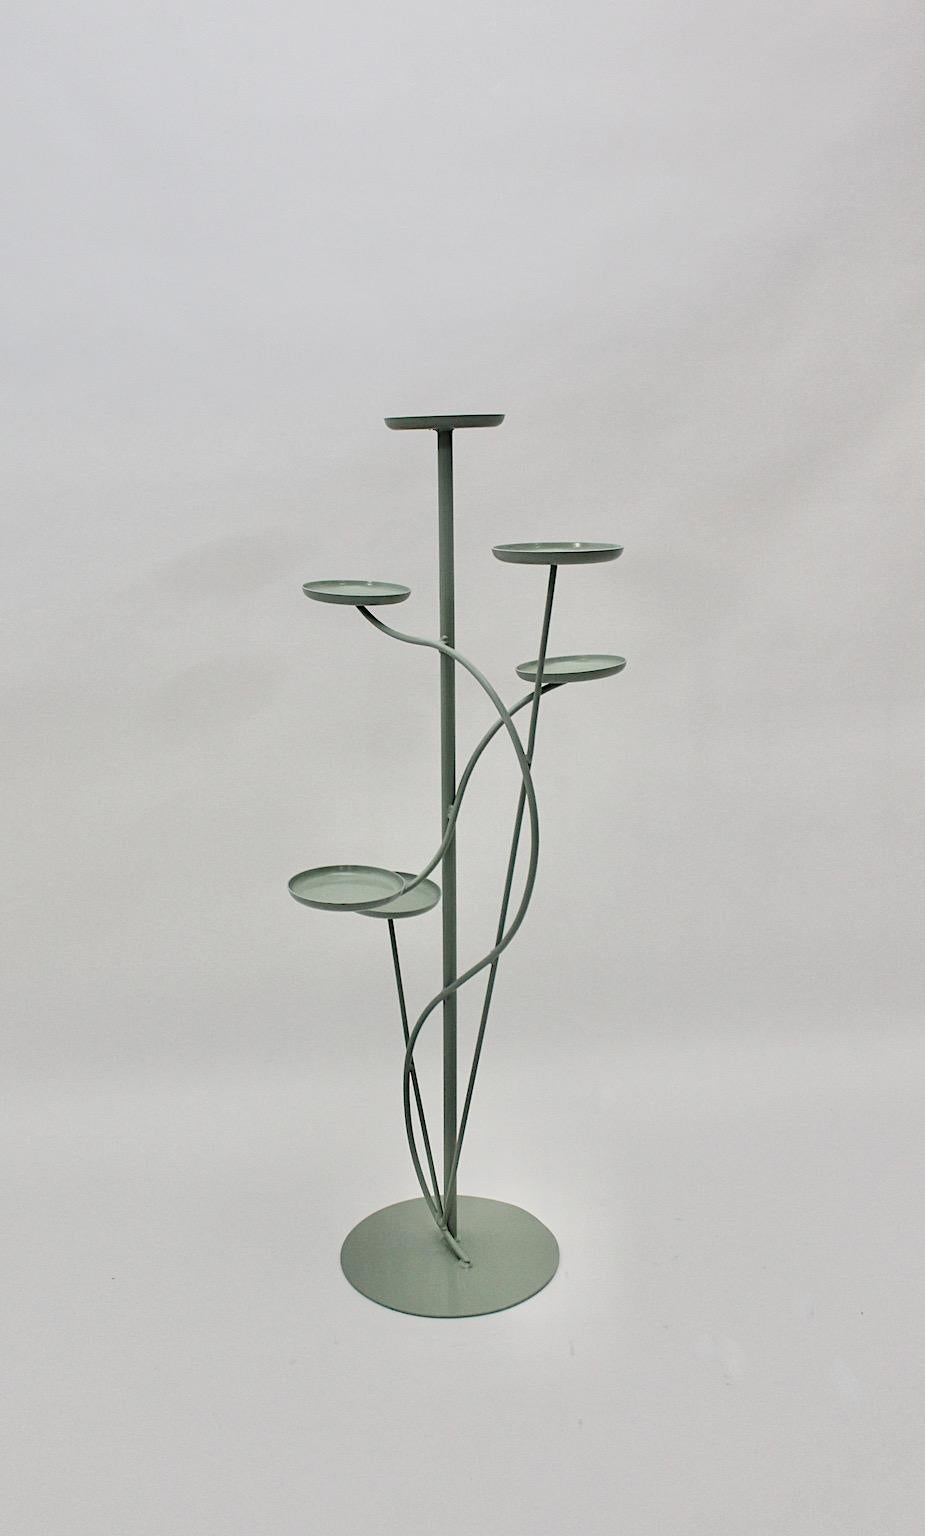 Lacquered Mid-Century Modern Vintage Metal Green Flower Stand Flower Rack 1950s Austria For Sale